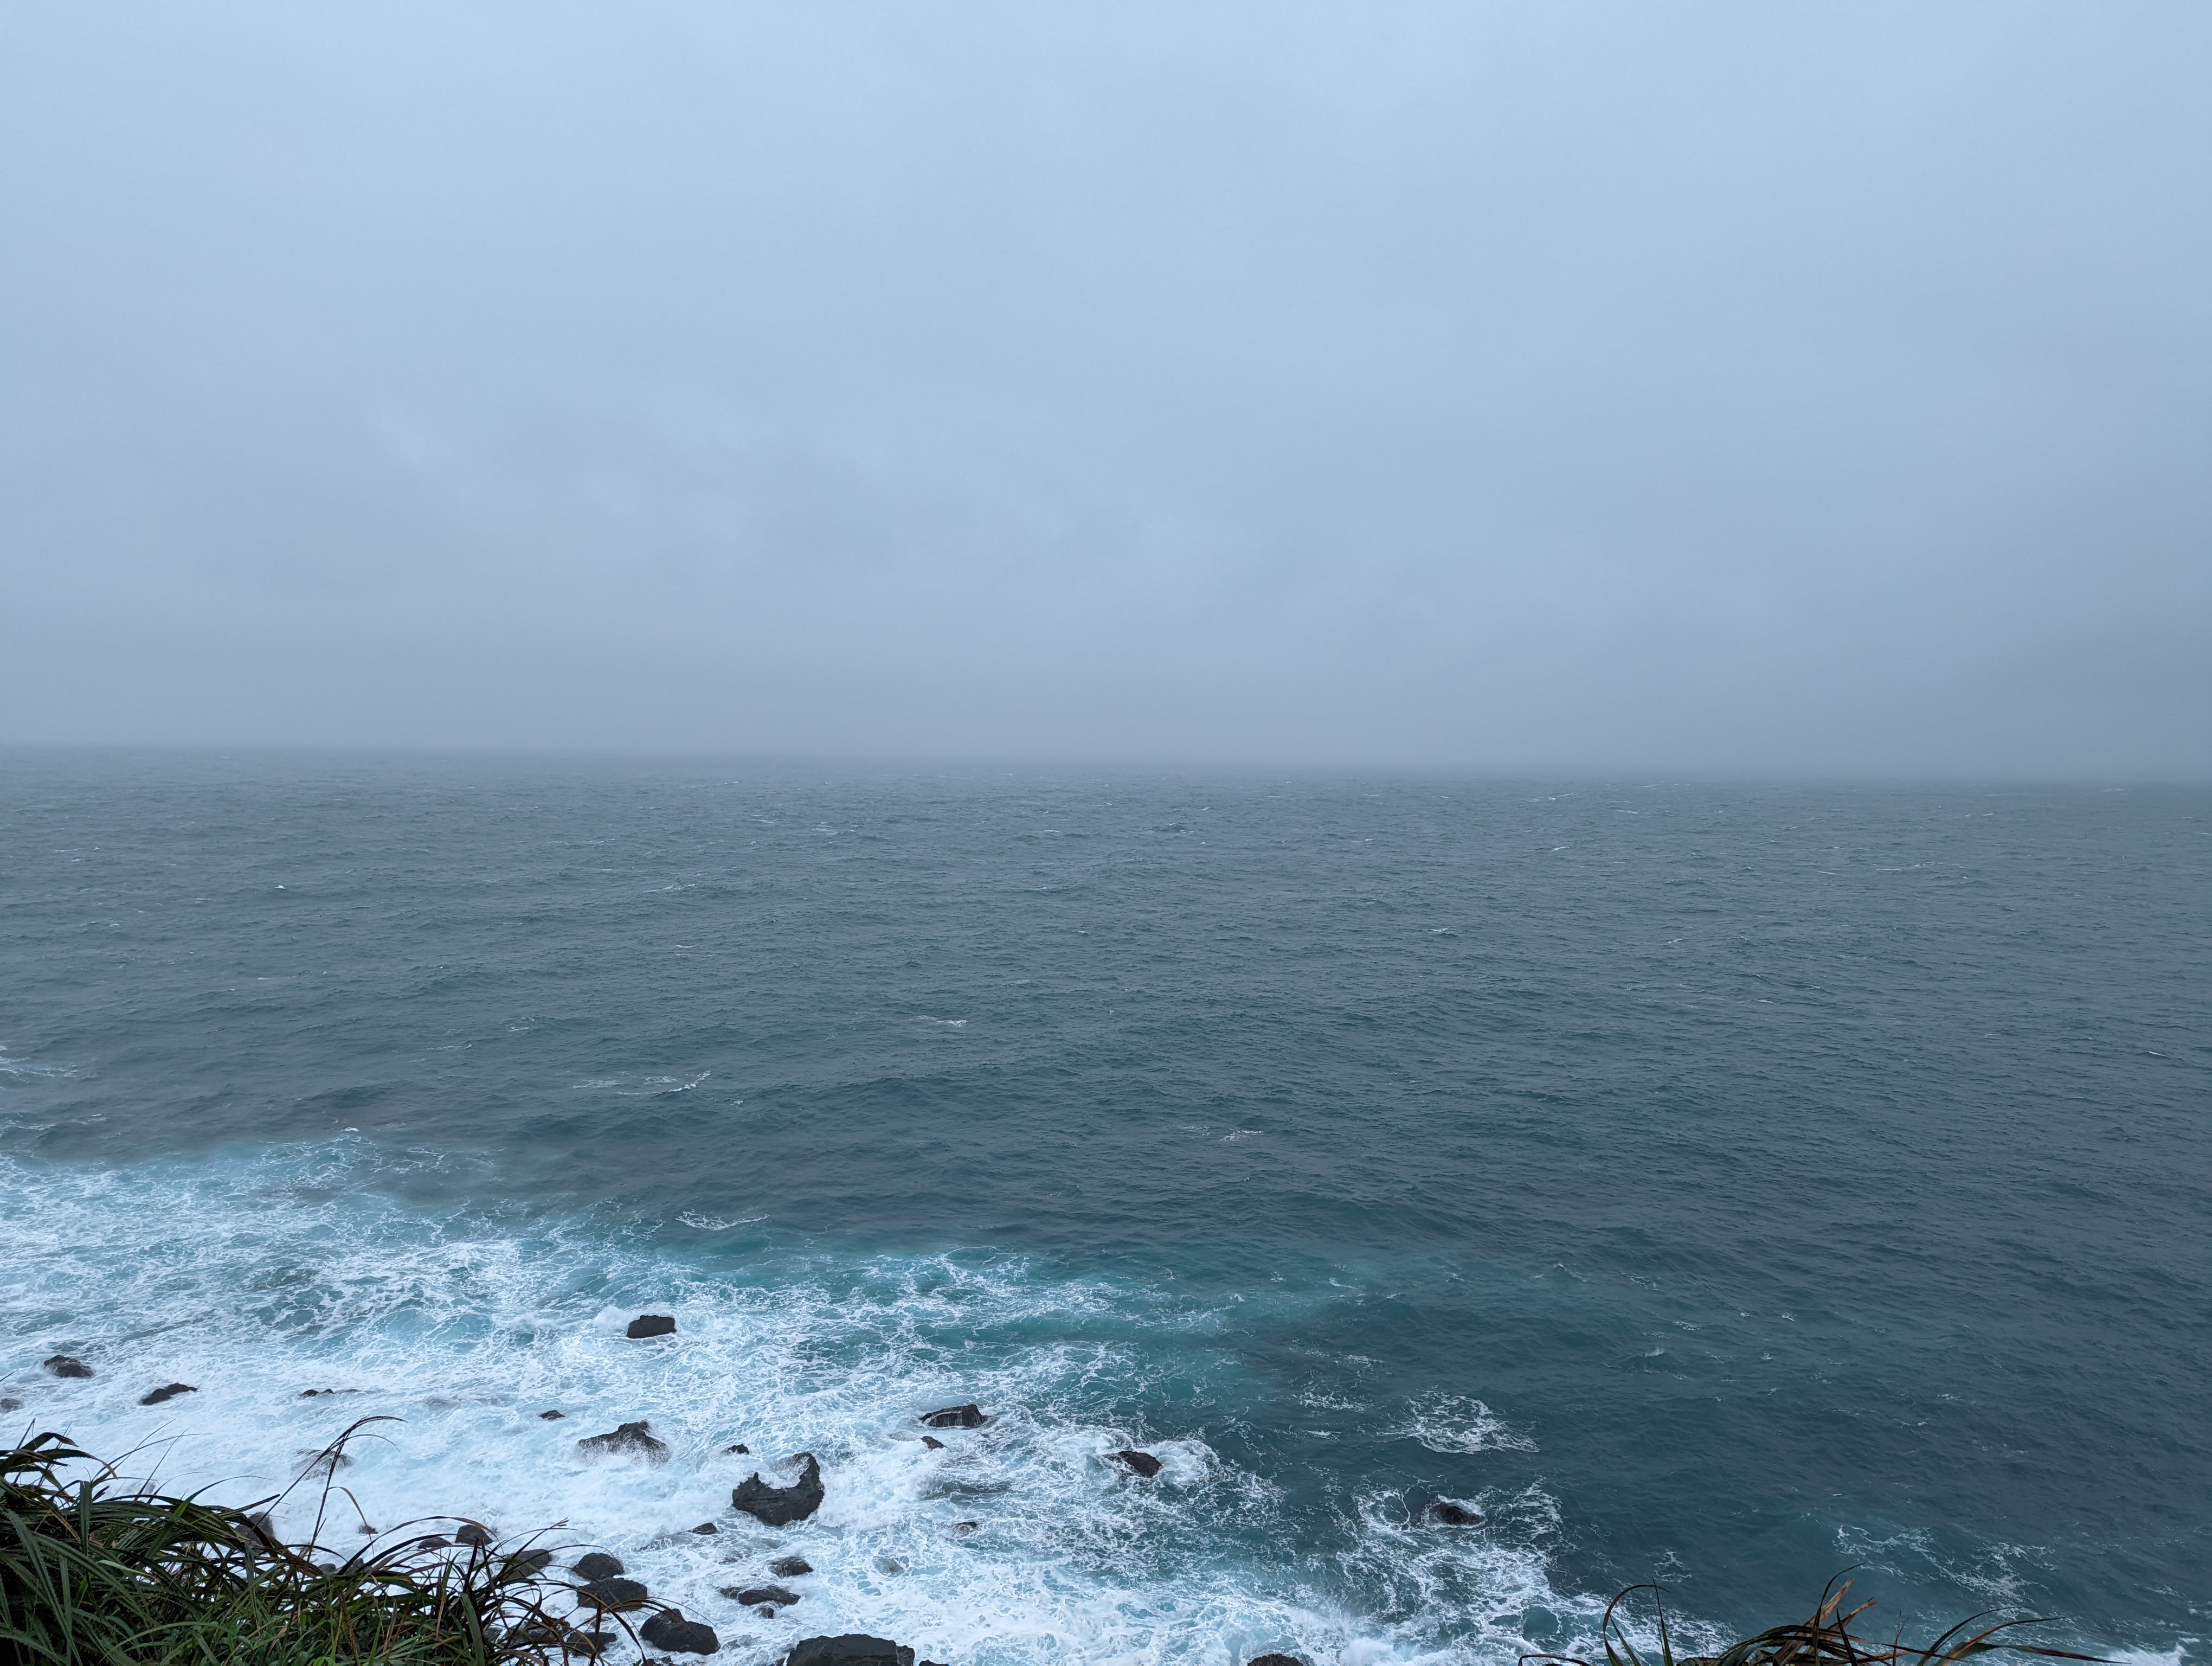 A photo of the ocean. It is a pleasing gradient, going from a deep blue, to a brilliant teal, to the white of cresting waves. There is some grass peeking into the bottom of the frame.